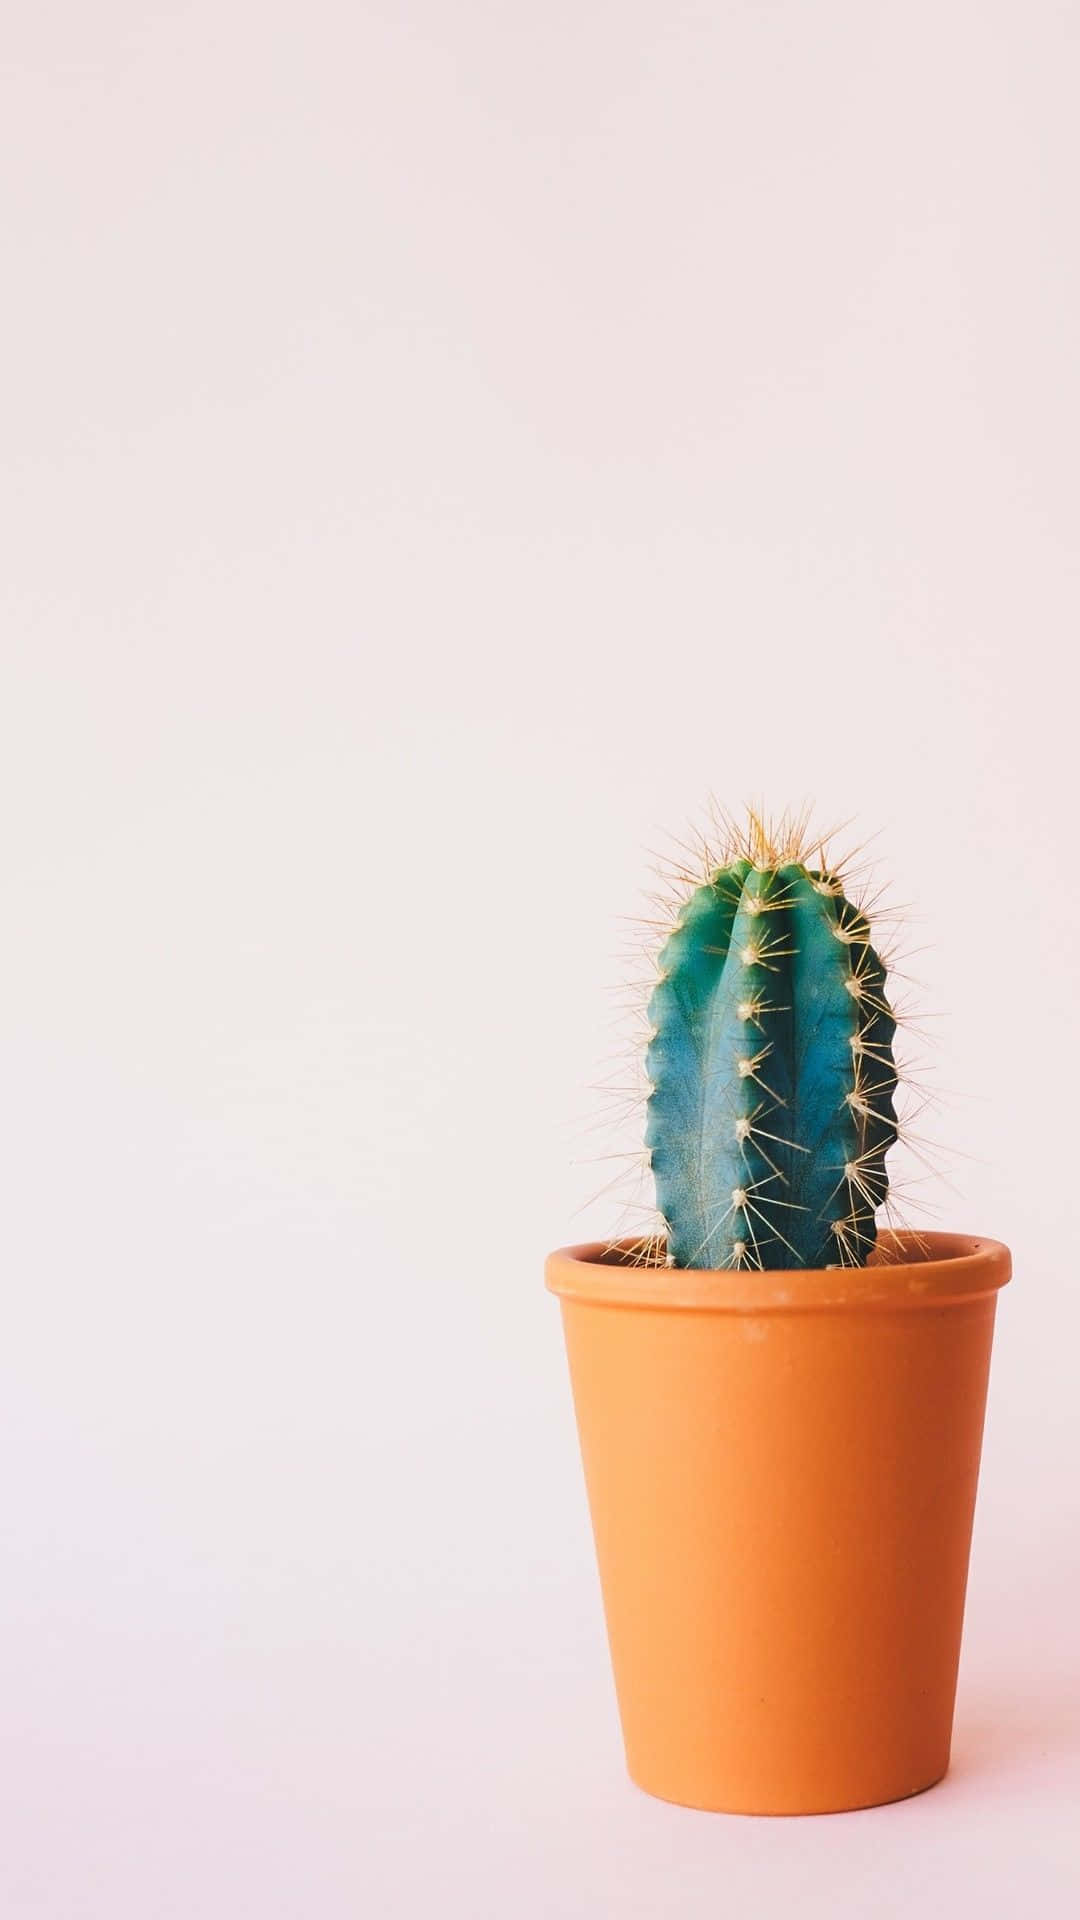 Aesthetic Cactus Photography Wallpaper